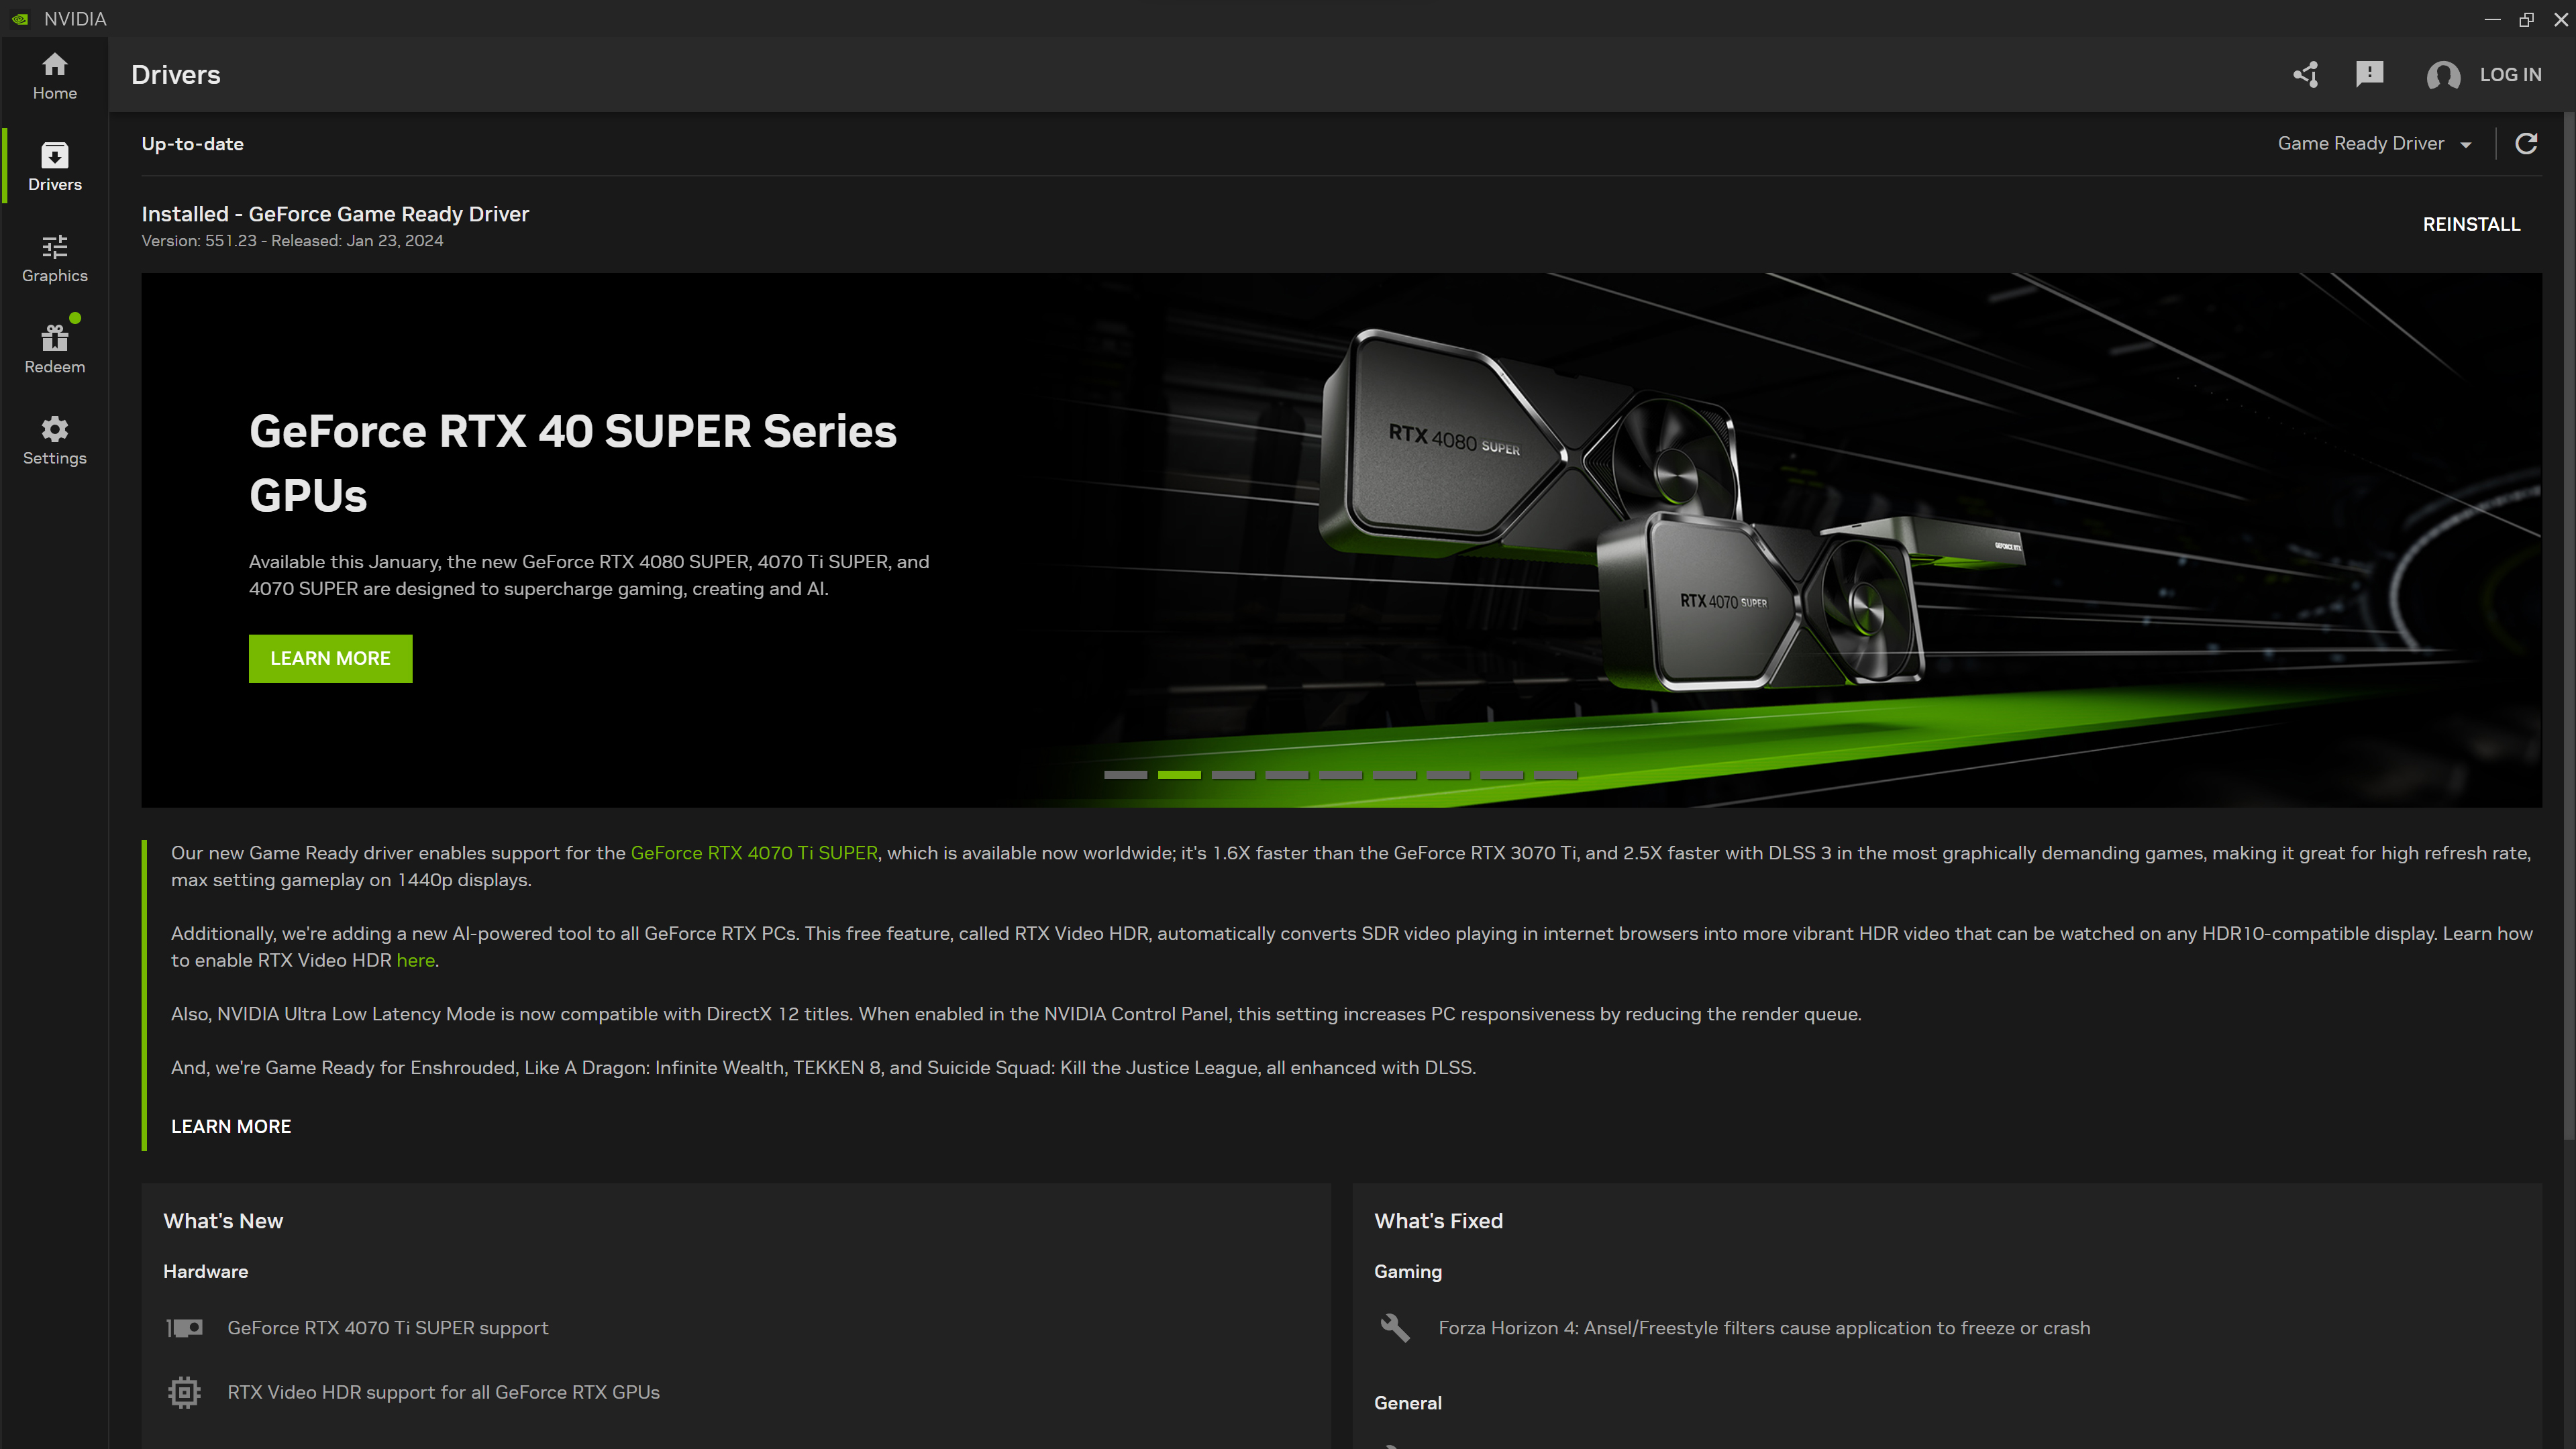 nvidia-app-driver-download-and-content-section.jpg